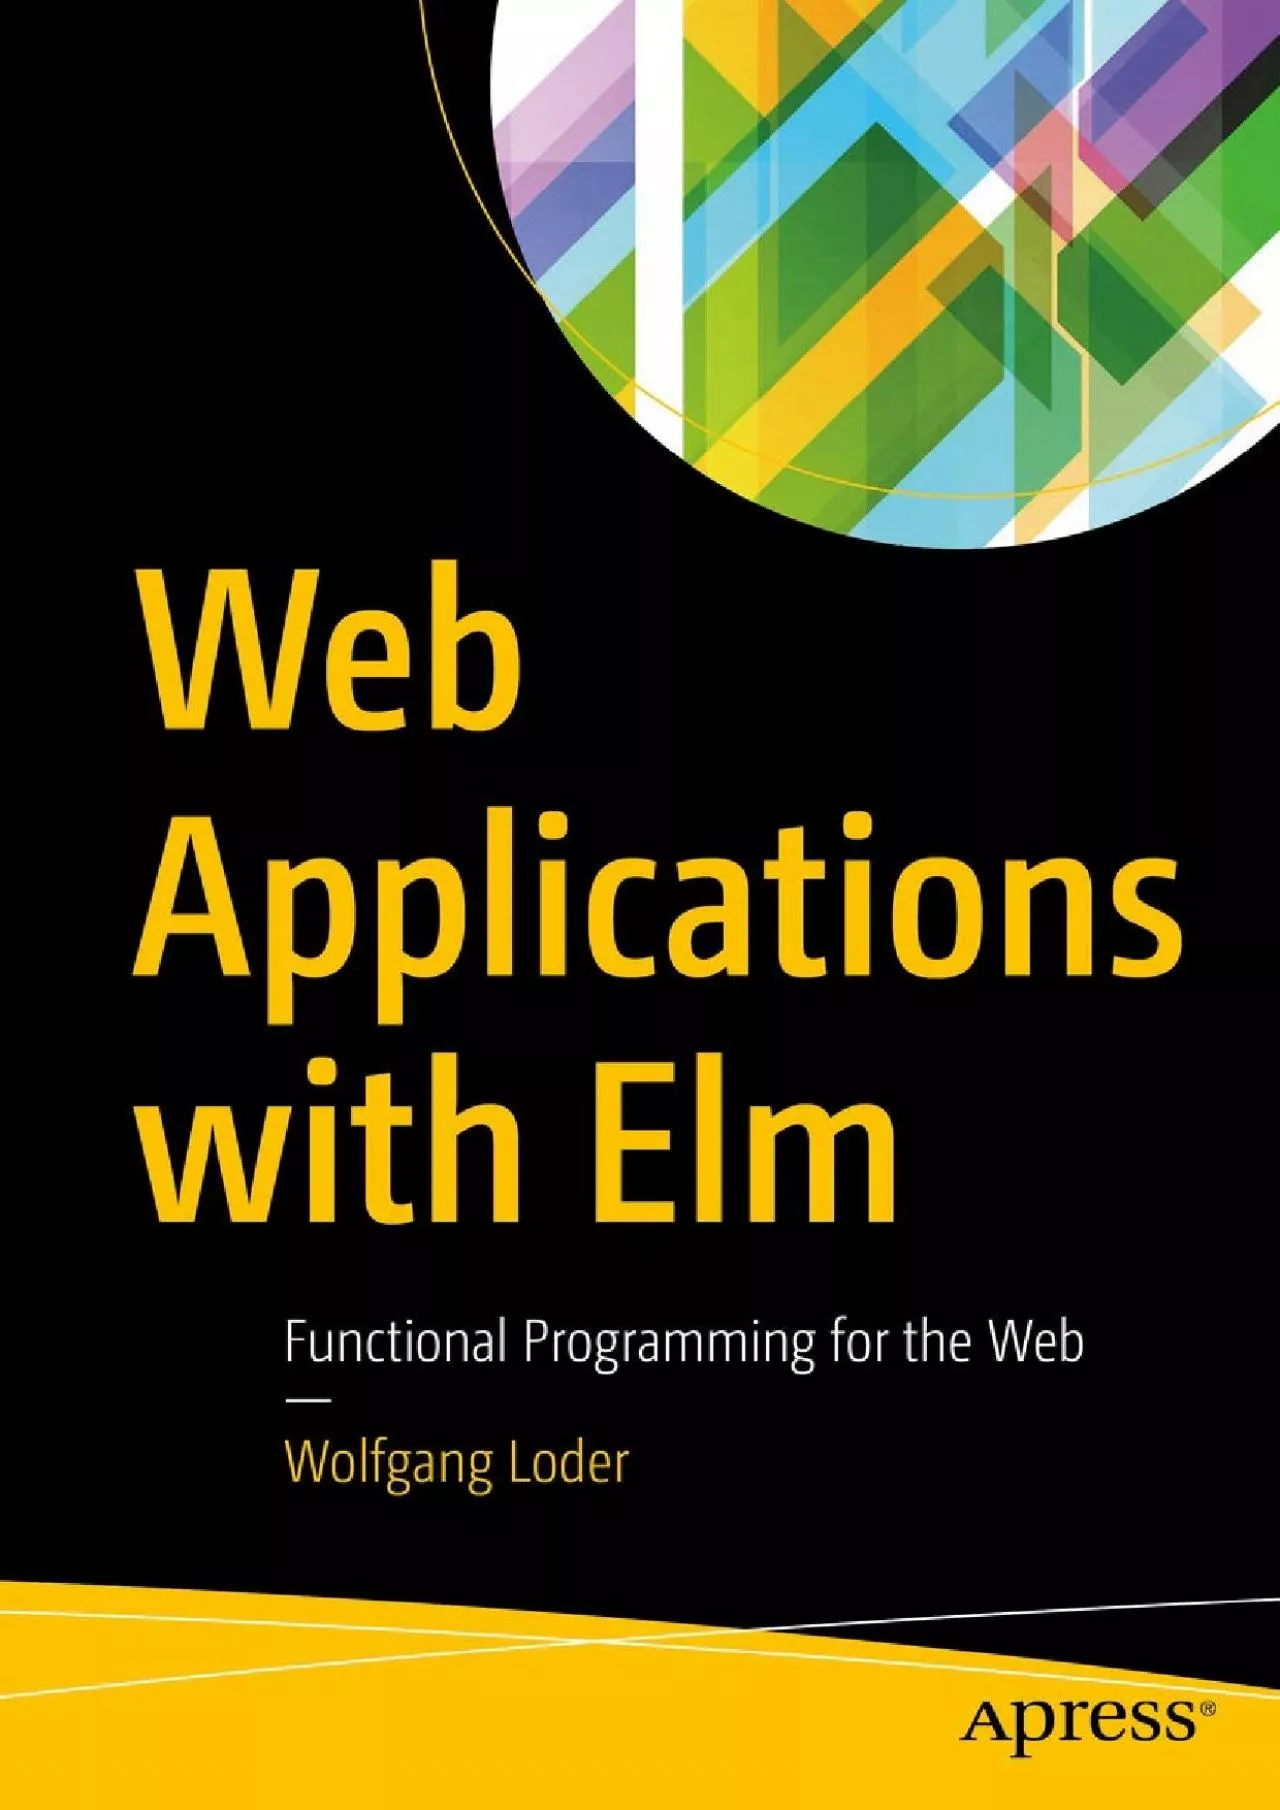 [BEST]-Web Applications with Elm: Functional Programming for the Web